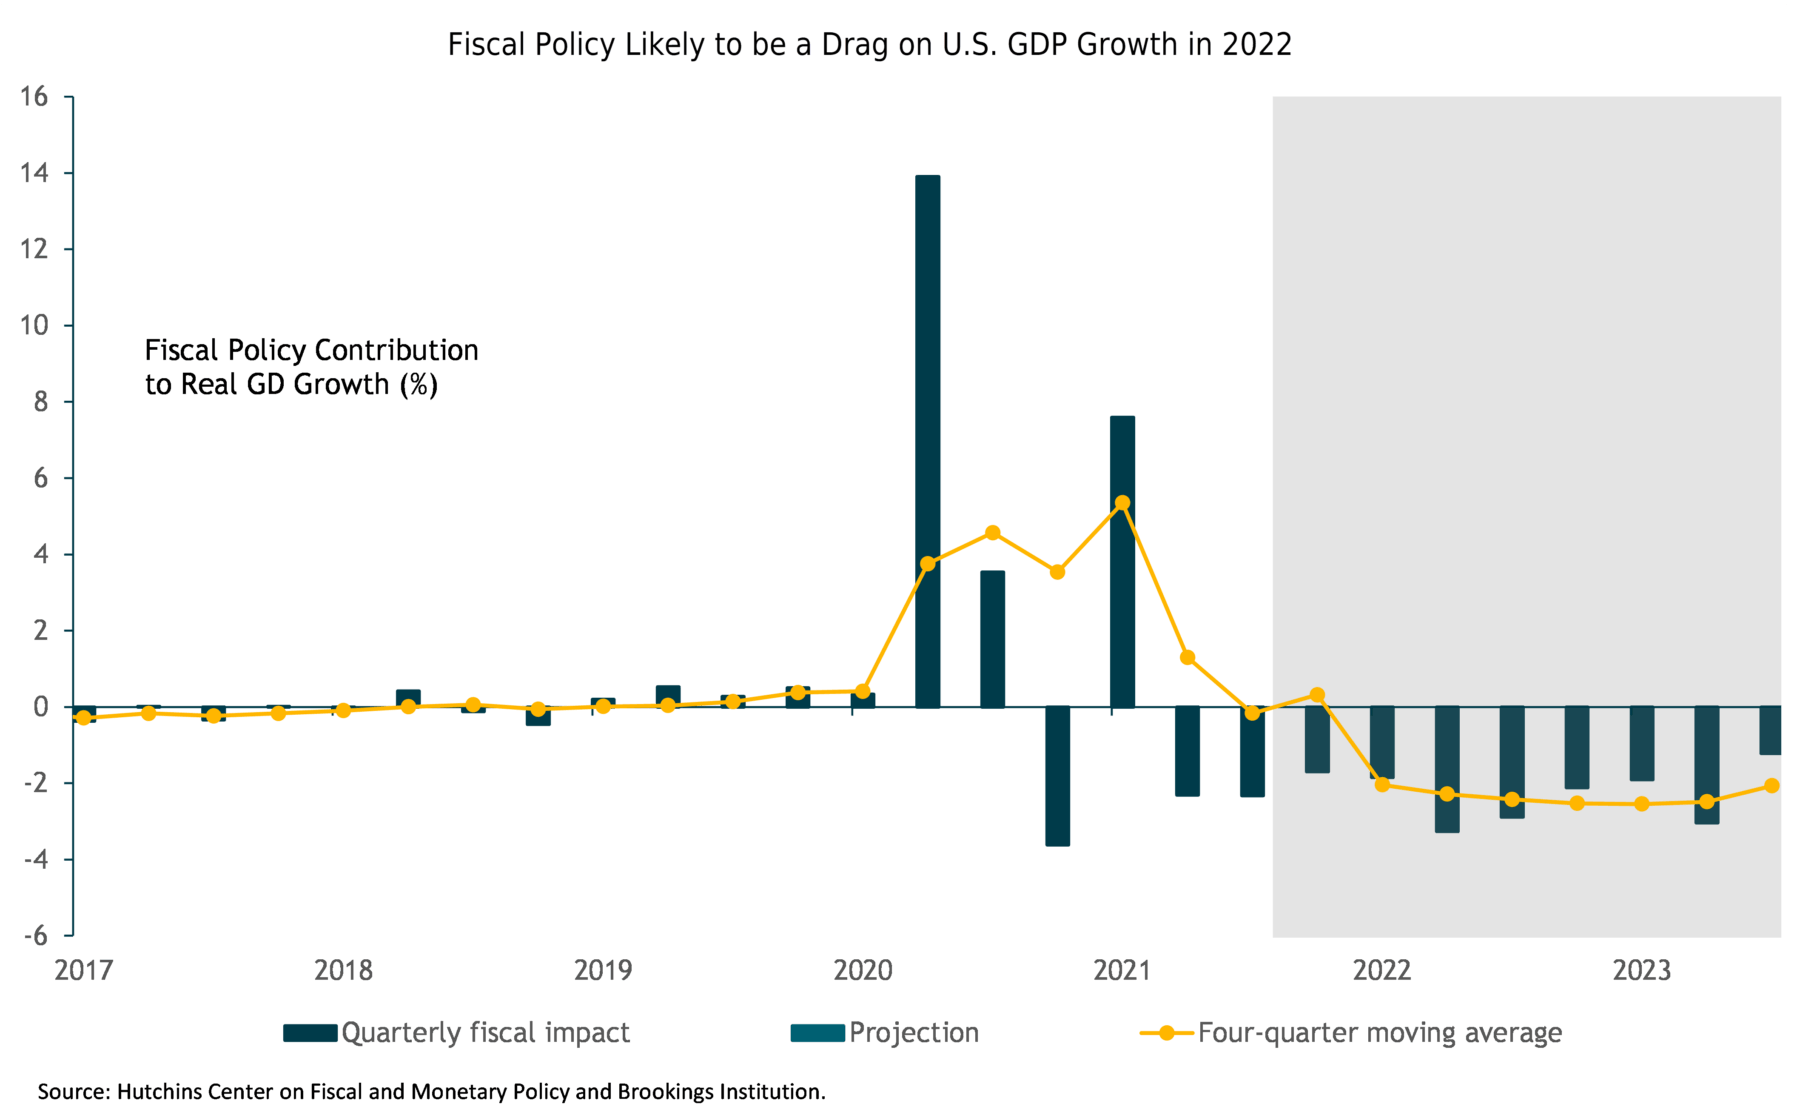 Fiscal Policy likely to be a drag on US GDP Growth in 2022